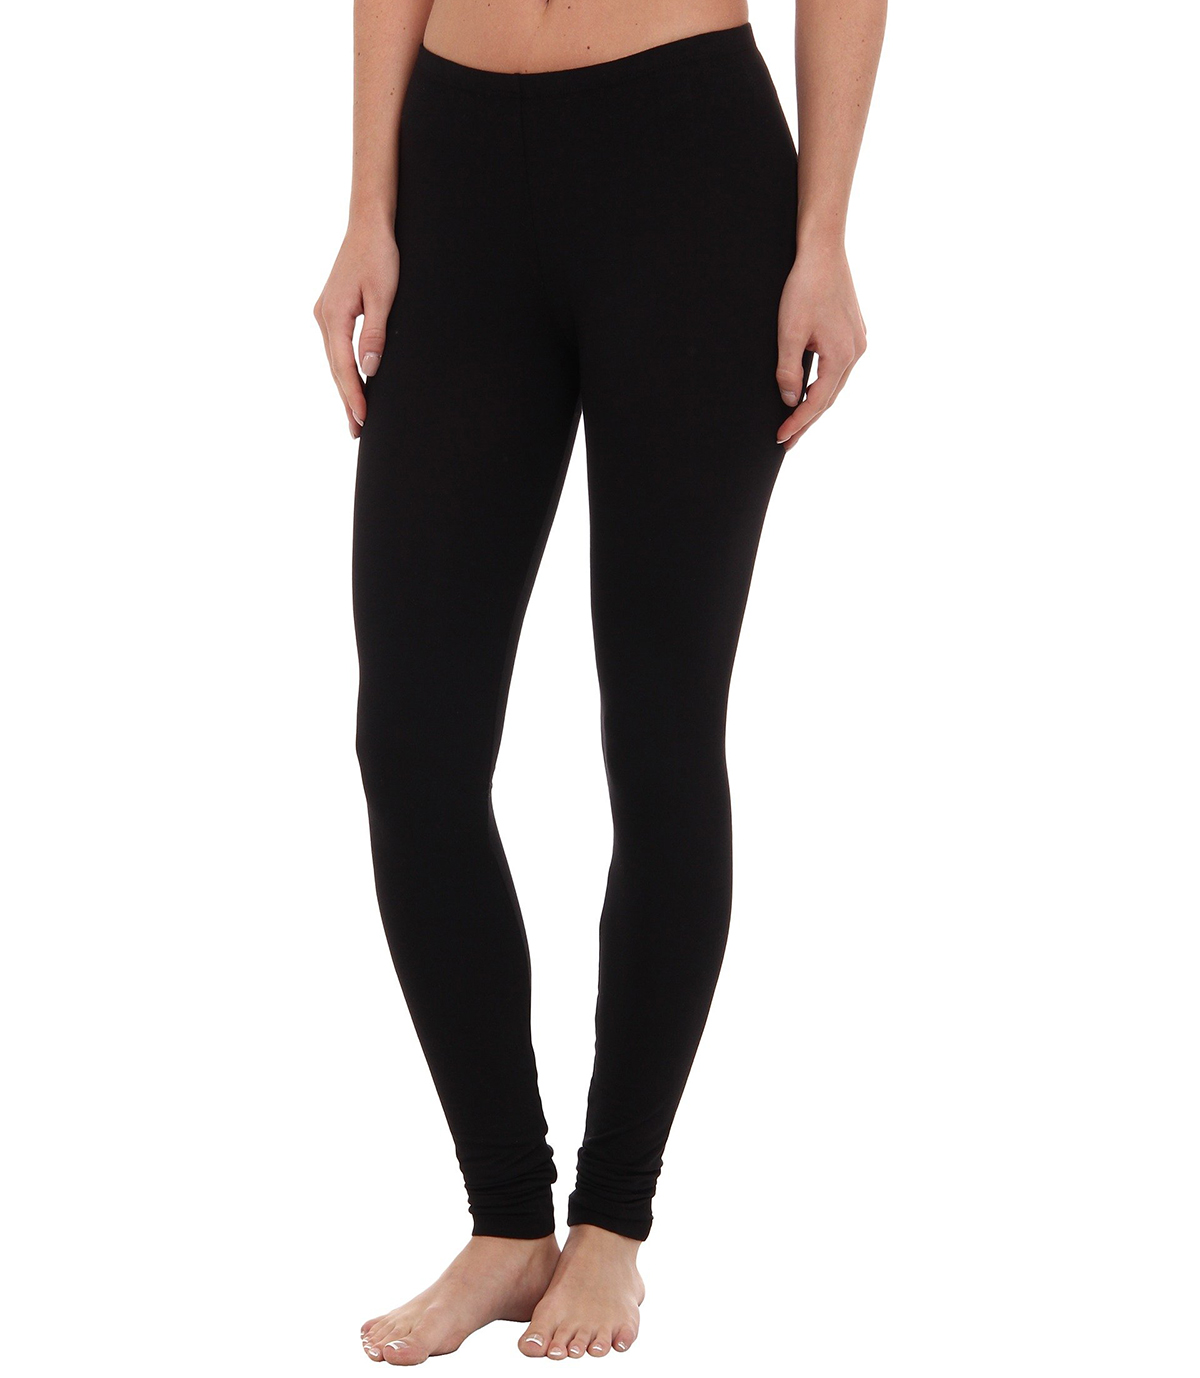 11 of the Absolute Best Black Leggings for Every Body Type | Carmon Report